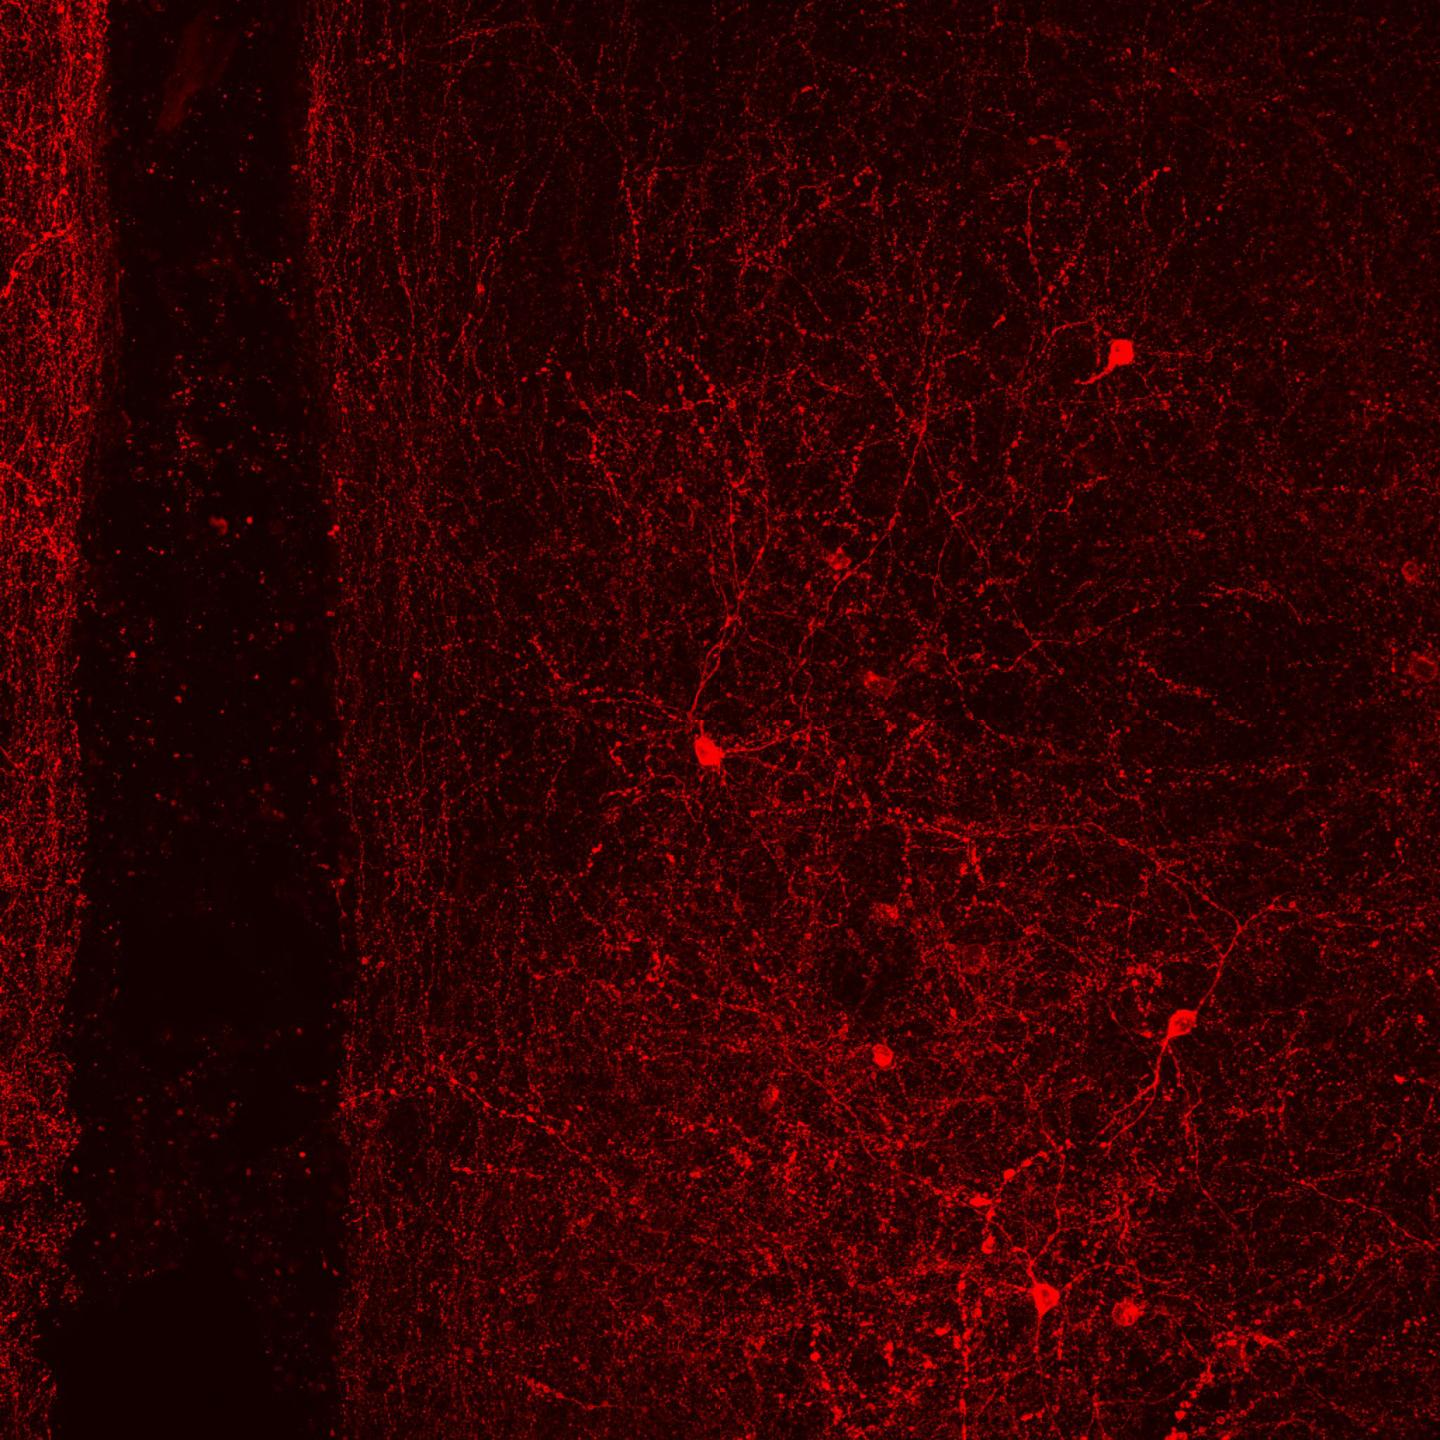 Neurons of Love